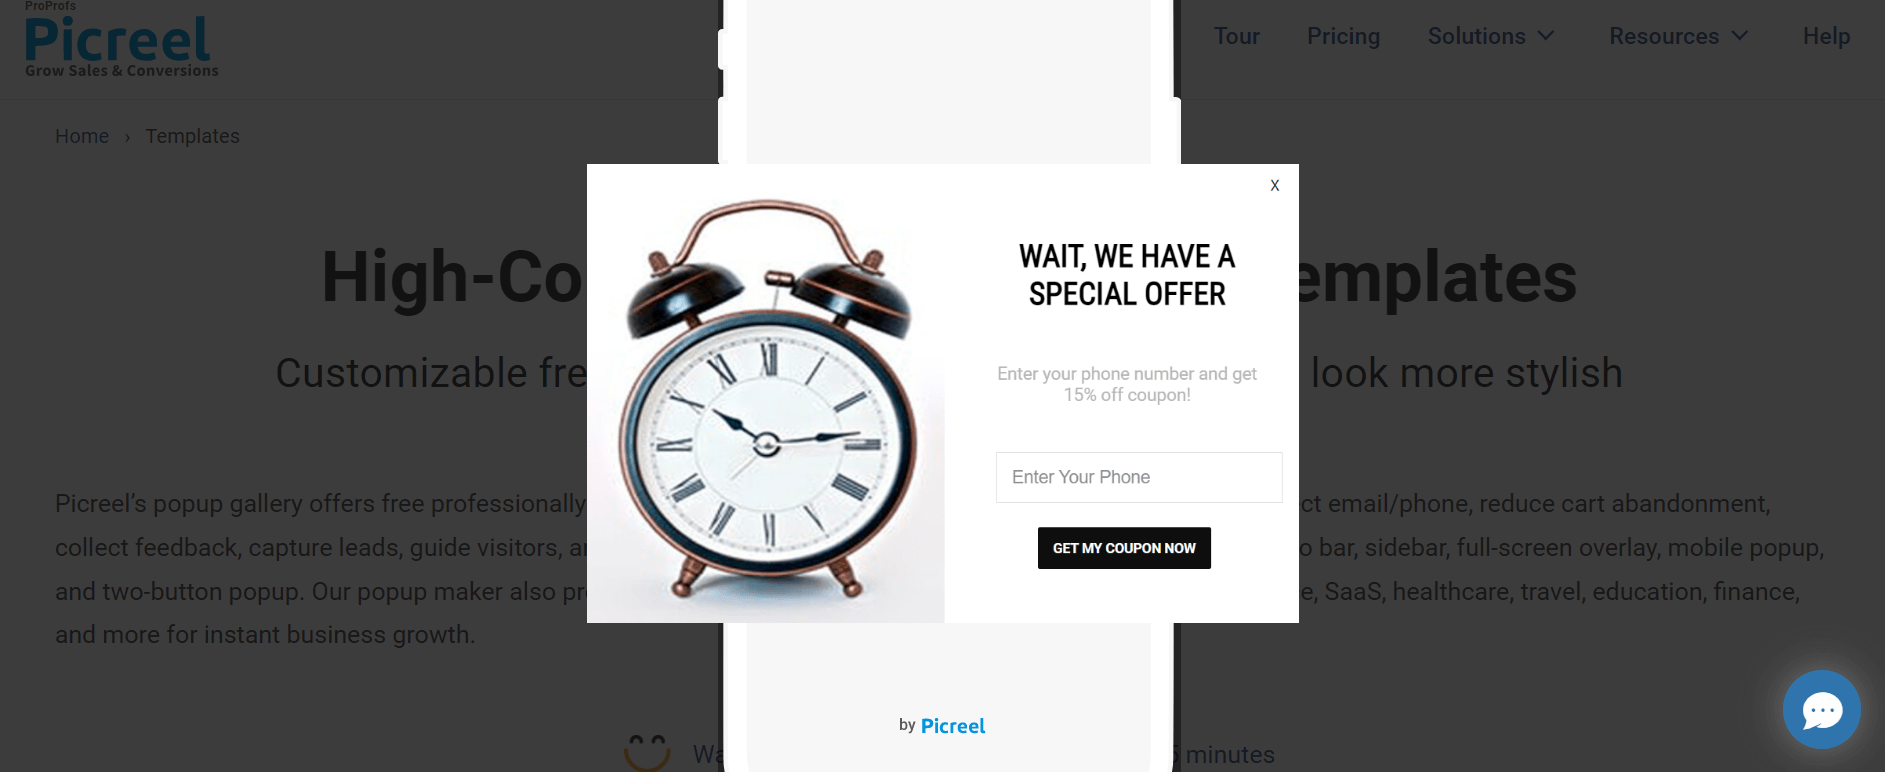 Scroll-triggered popups